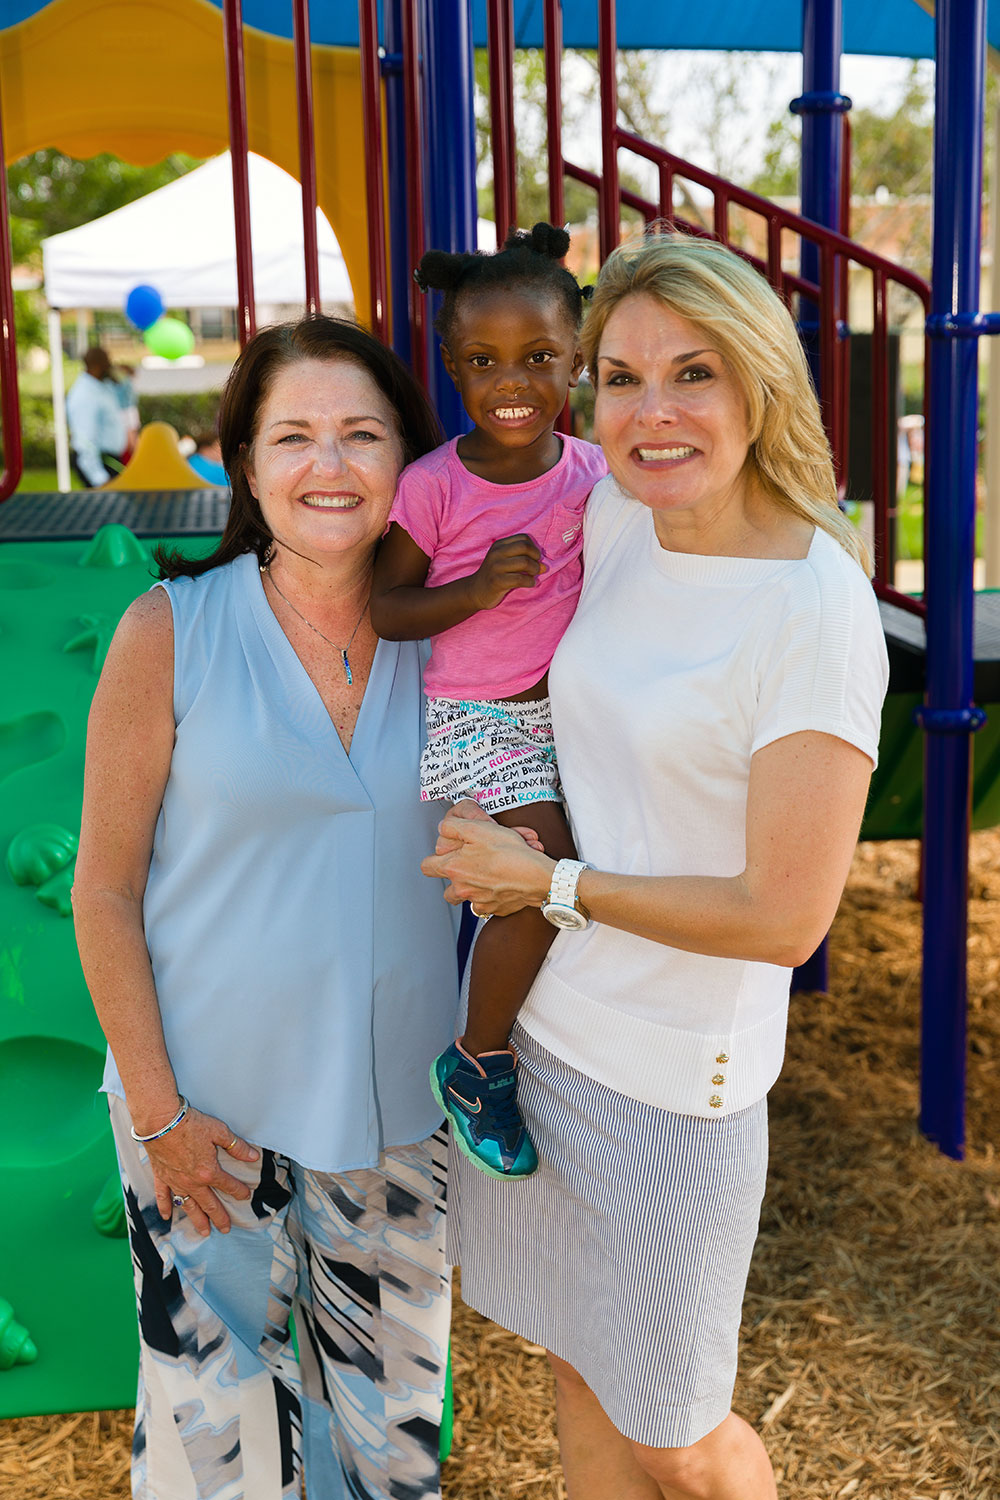 GL Homes and the new playground for The Lord's Place in West Palm Beach, Florida